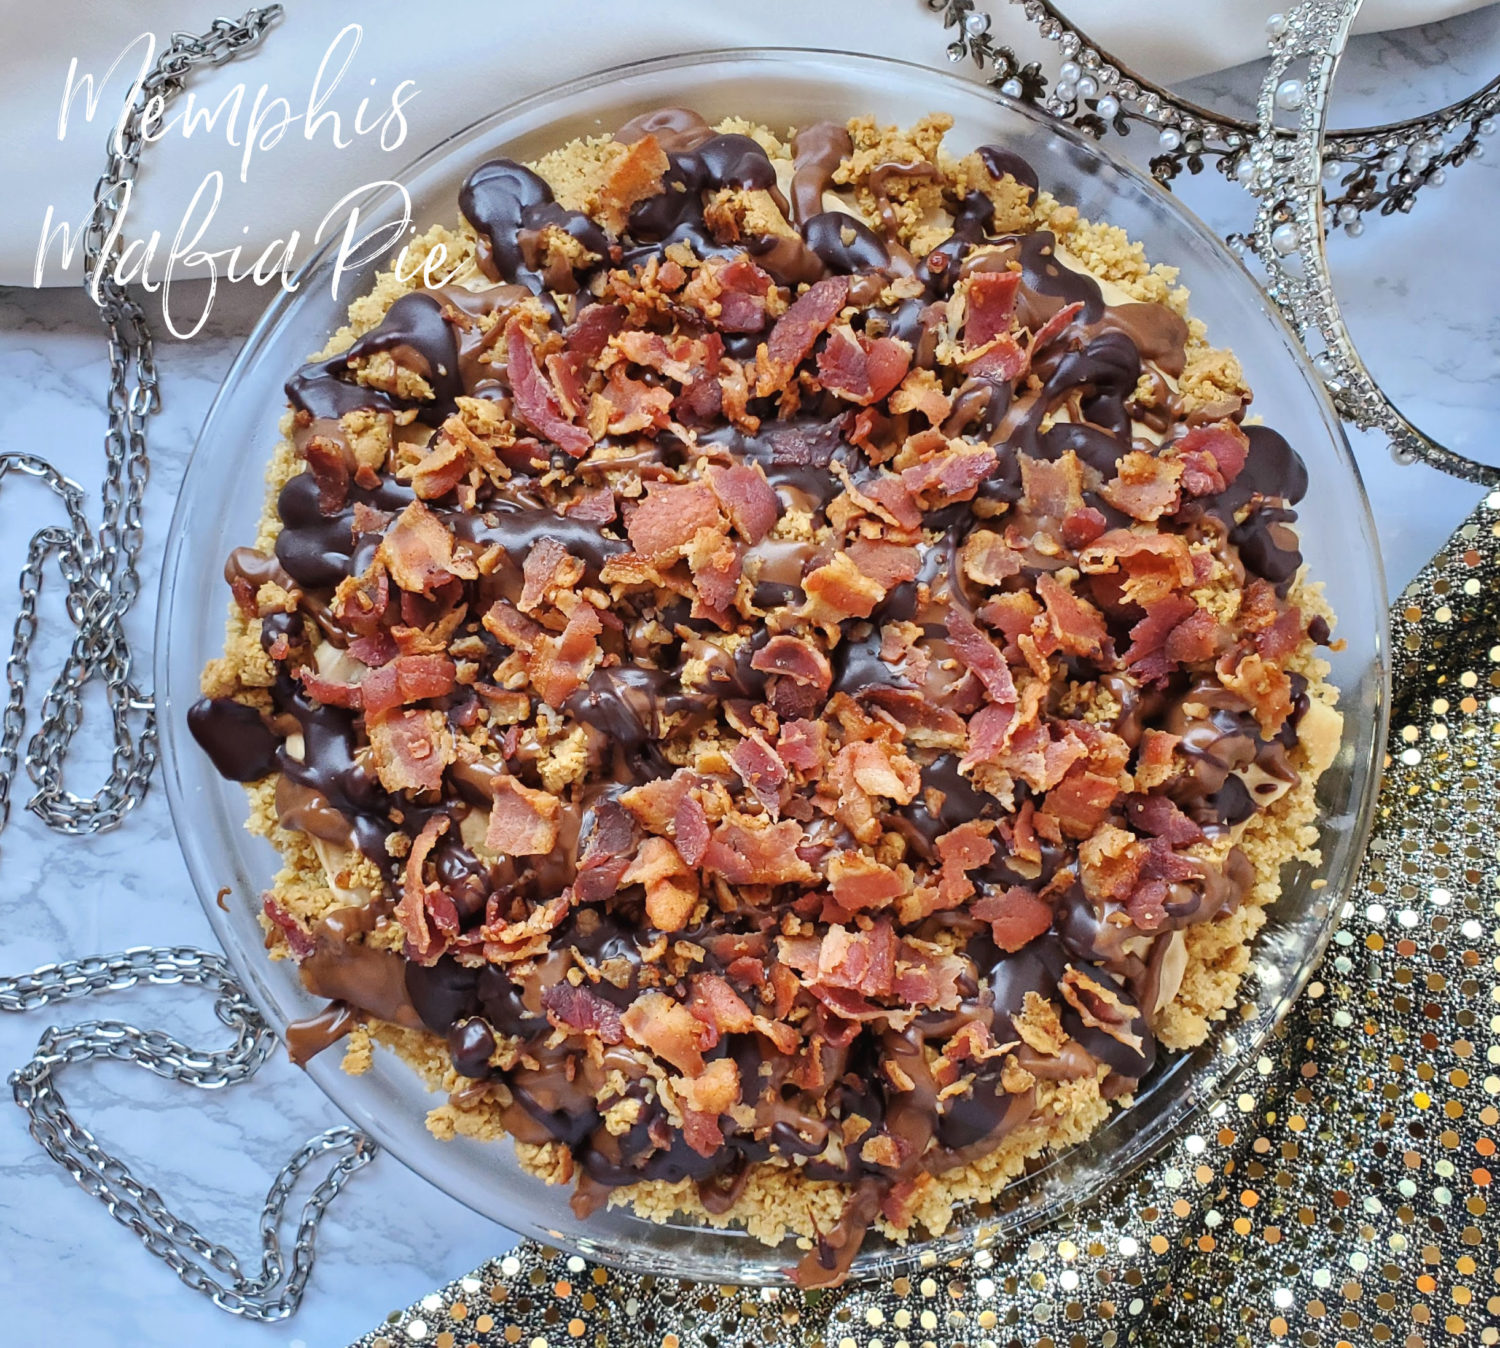 Memphis Mafia Pie: Vanilla wafer crust, peanut butter filling, bananas, homemade "Reeses" crumbles, drizzled with peanut butter fudge, chocolate ganache & bacon! 